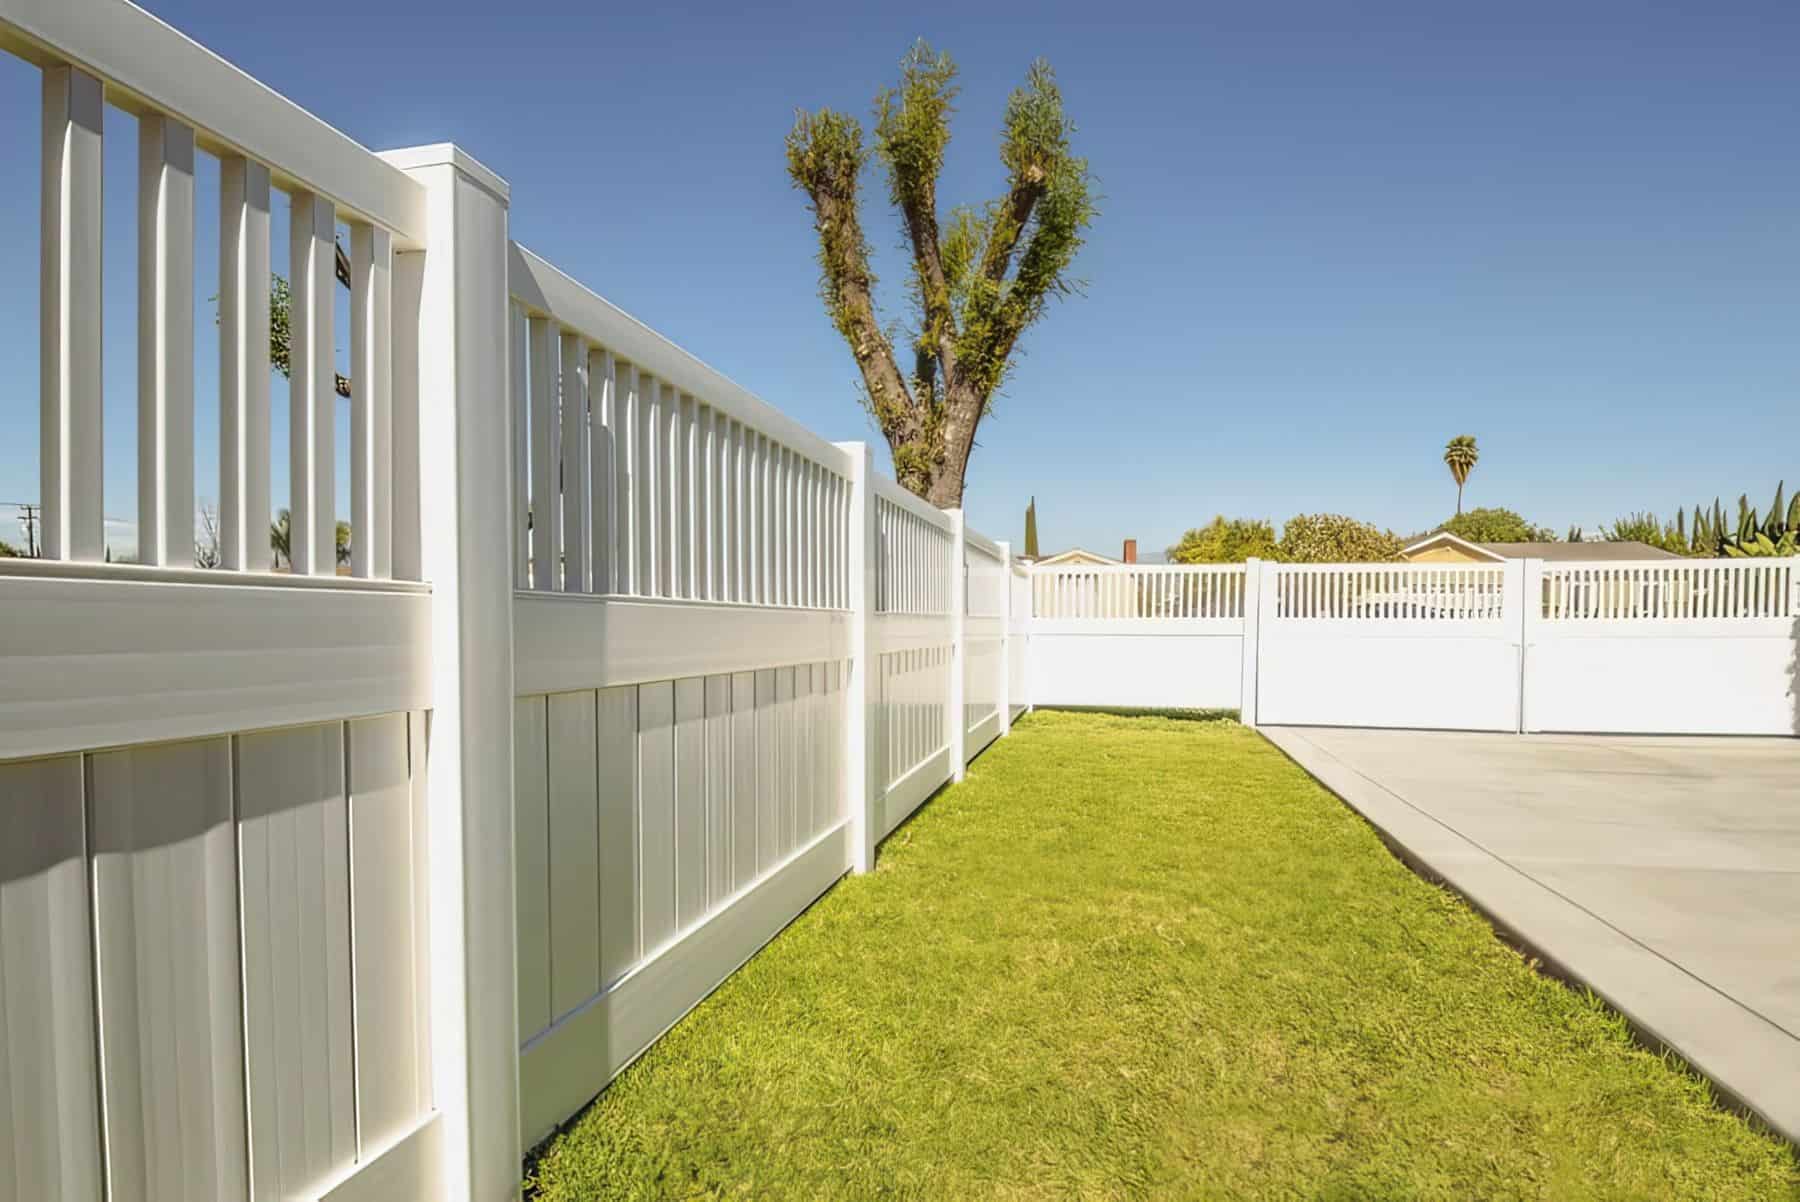 Vinyl privacy and picket fence with rolling gate leading into driveway beside the patch of grass from sidewalk with trees.